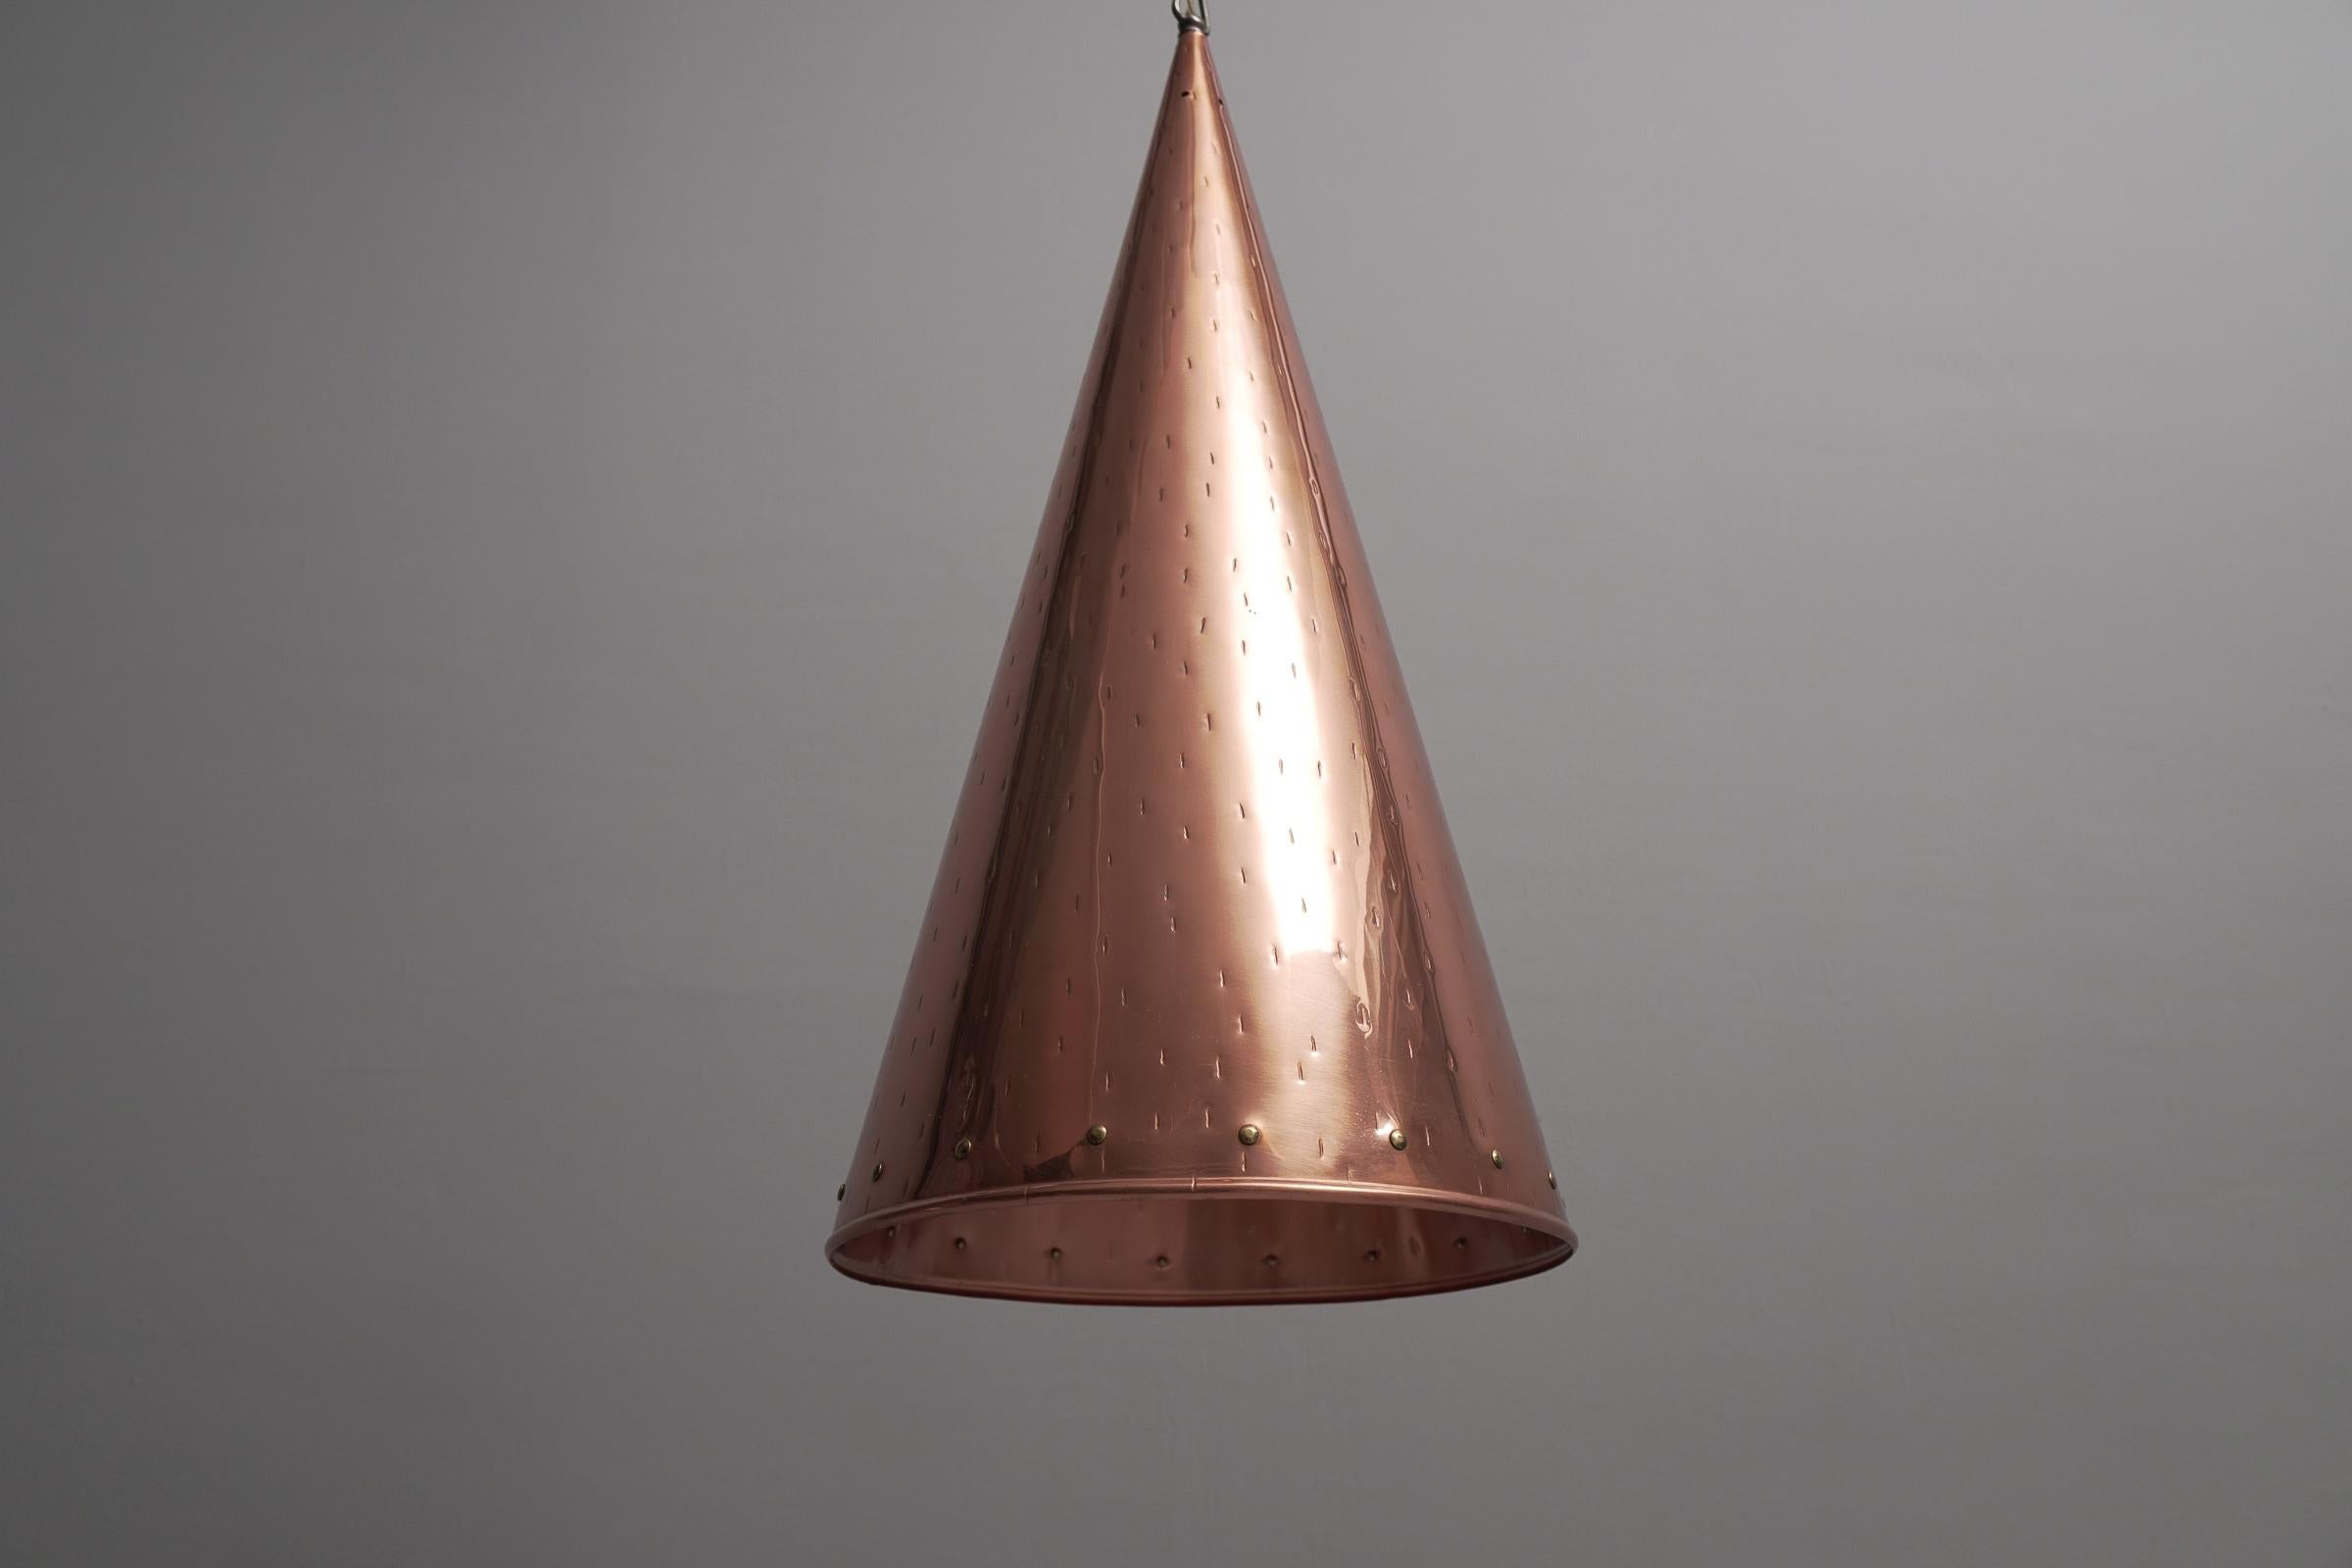 Hammered Copper Cone Pendant Lamps by E.S Horn Aalestrup, 1950s Denmark For Sale 1